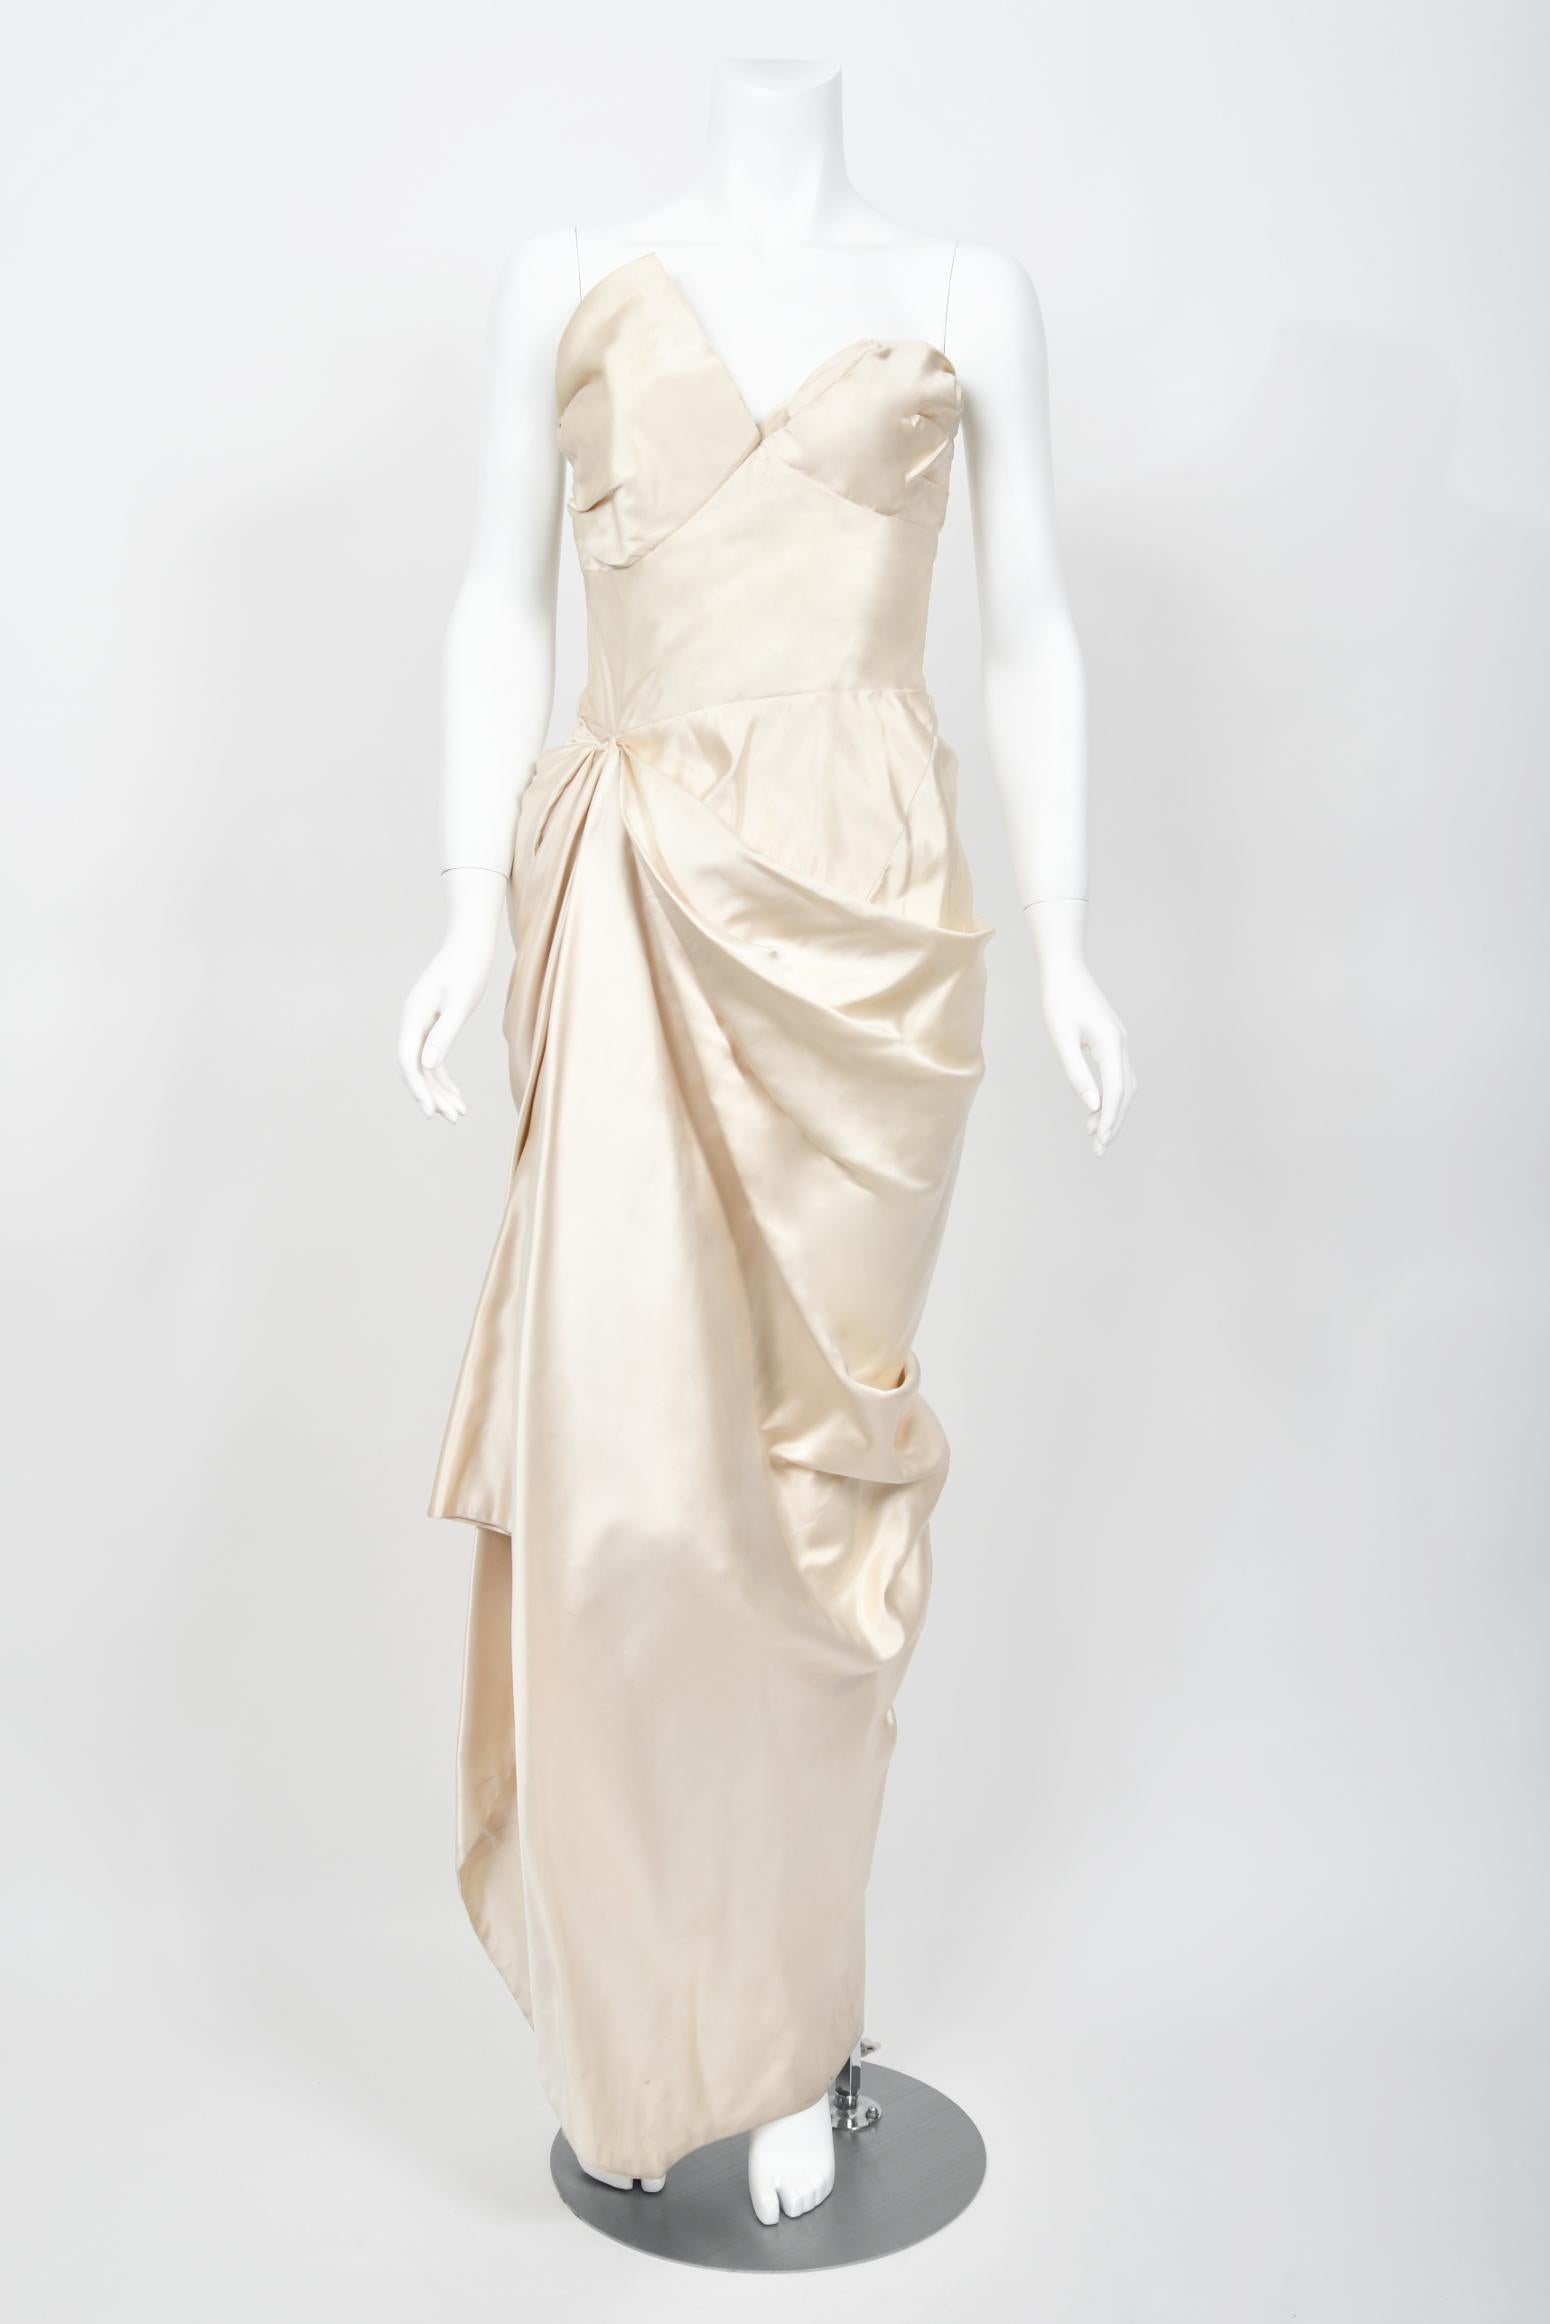 Women's 1949 Jeanne Lanvin Haute Couture Ivory Silk Satin Strapless Draped Bridal Gown  For Sale